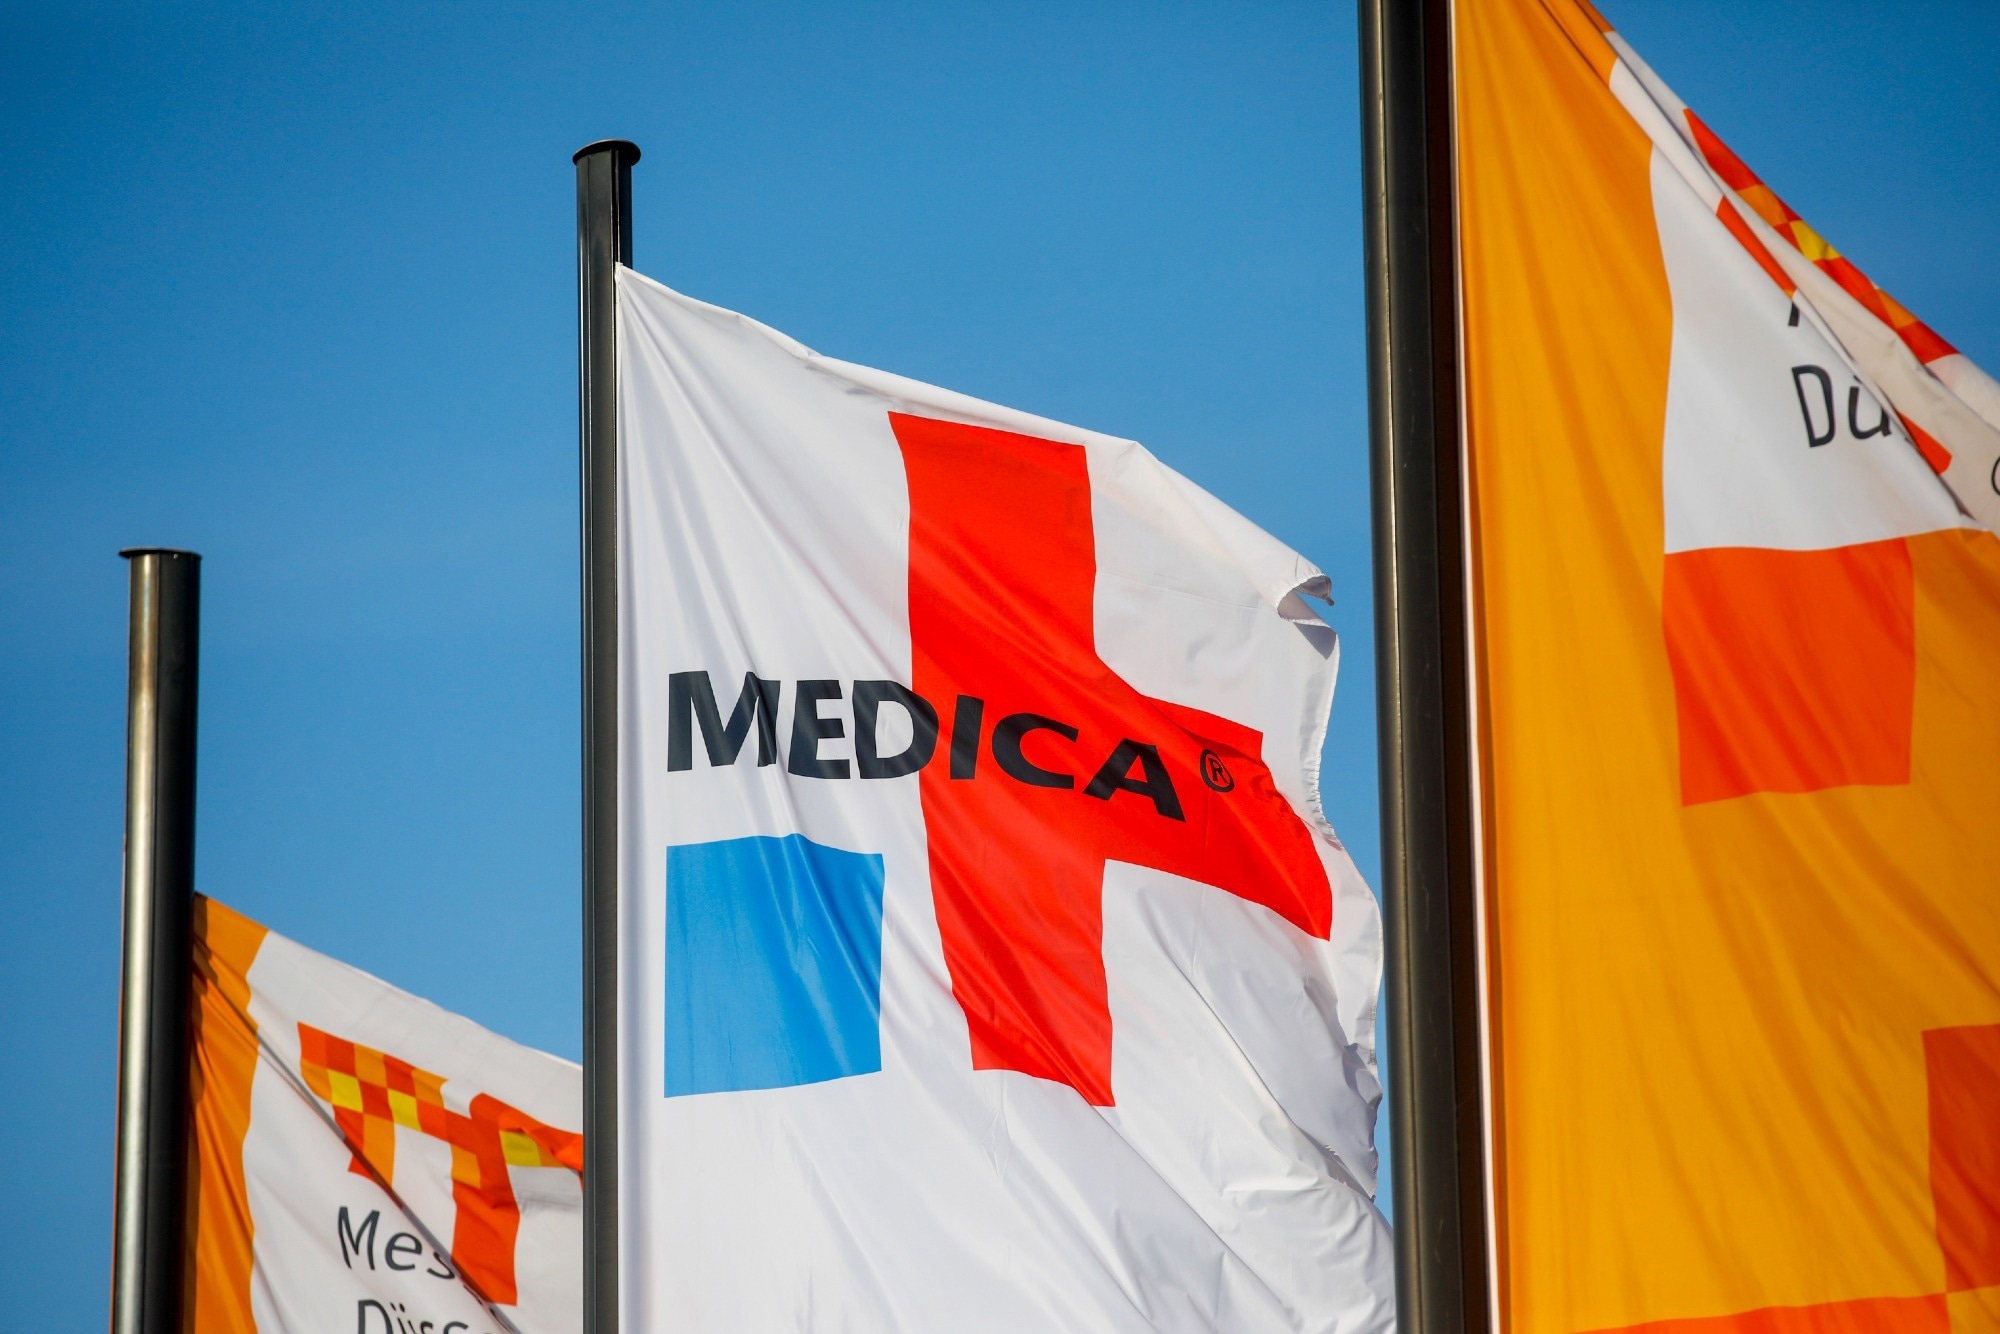 Connecting the Discipline of Medication at MEDICA